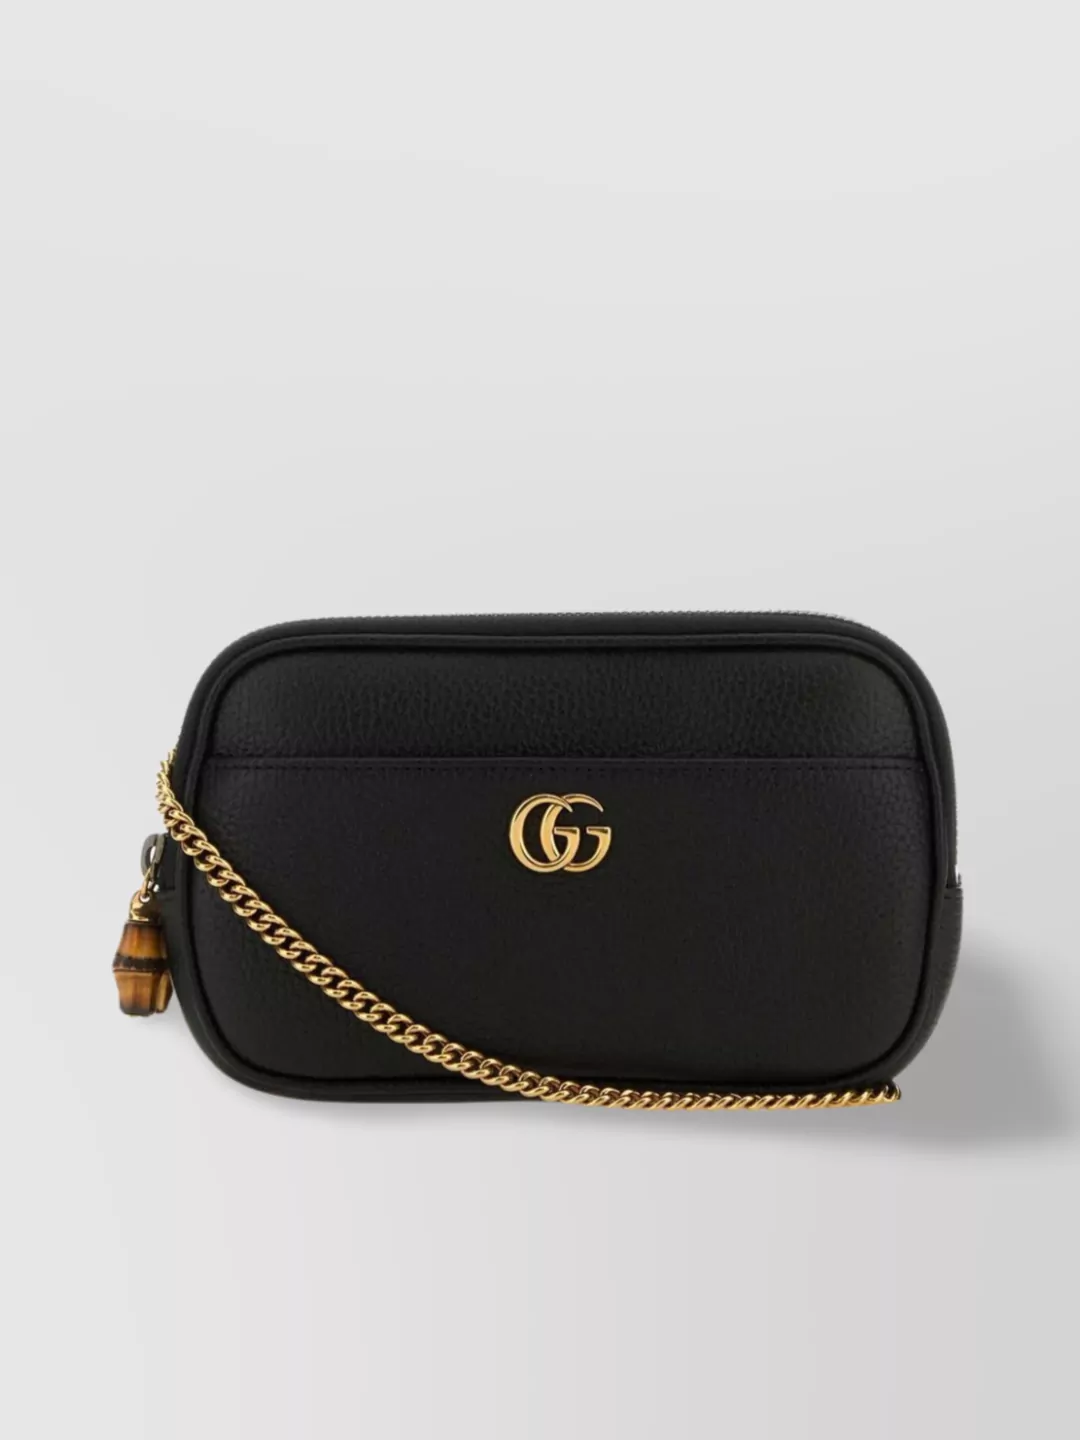 Gucci Leather Shoulder Bag With Chain Strap And Tassel Detail In Black